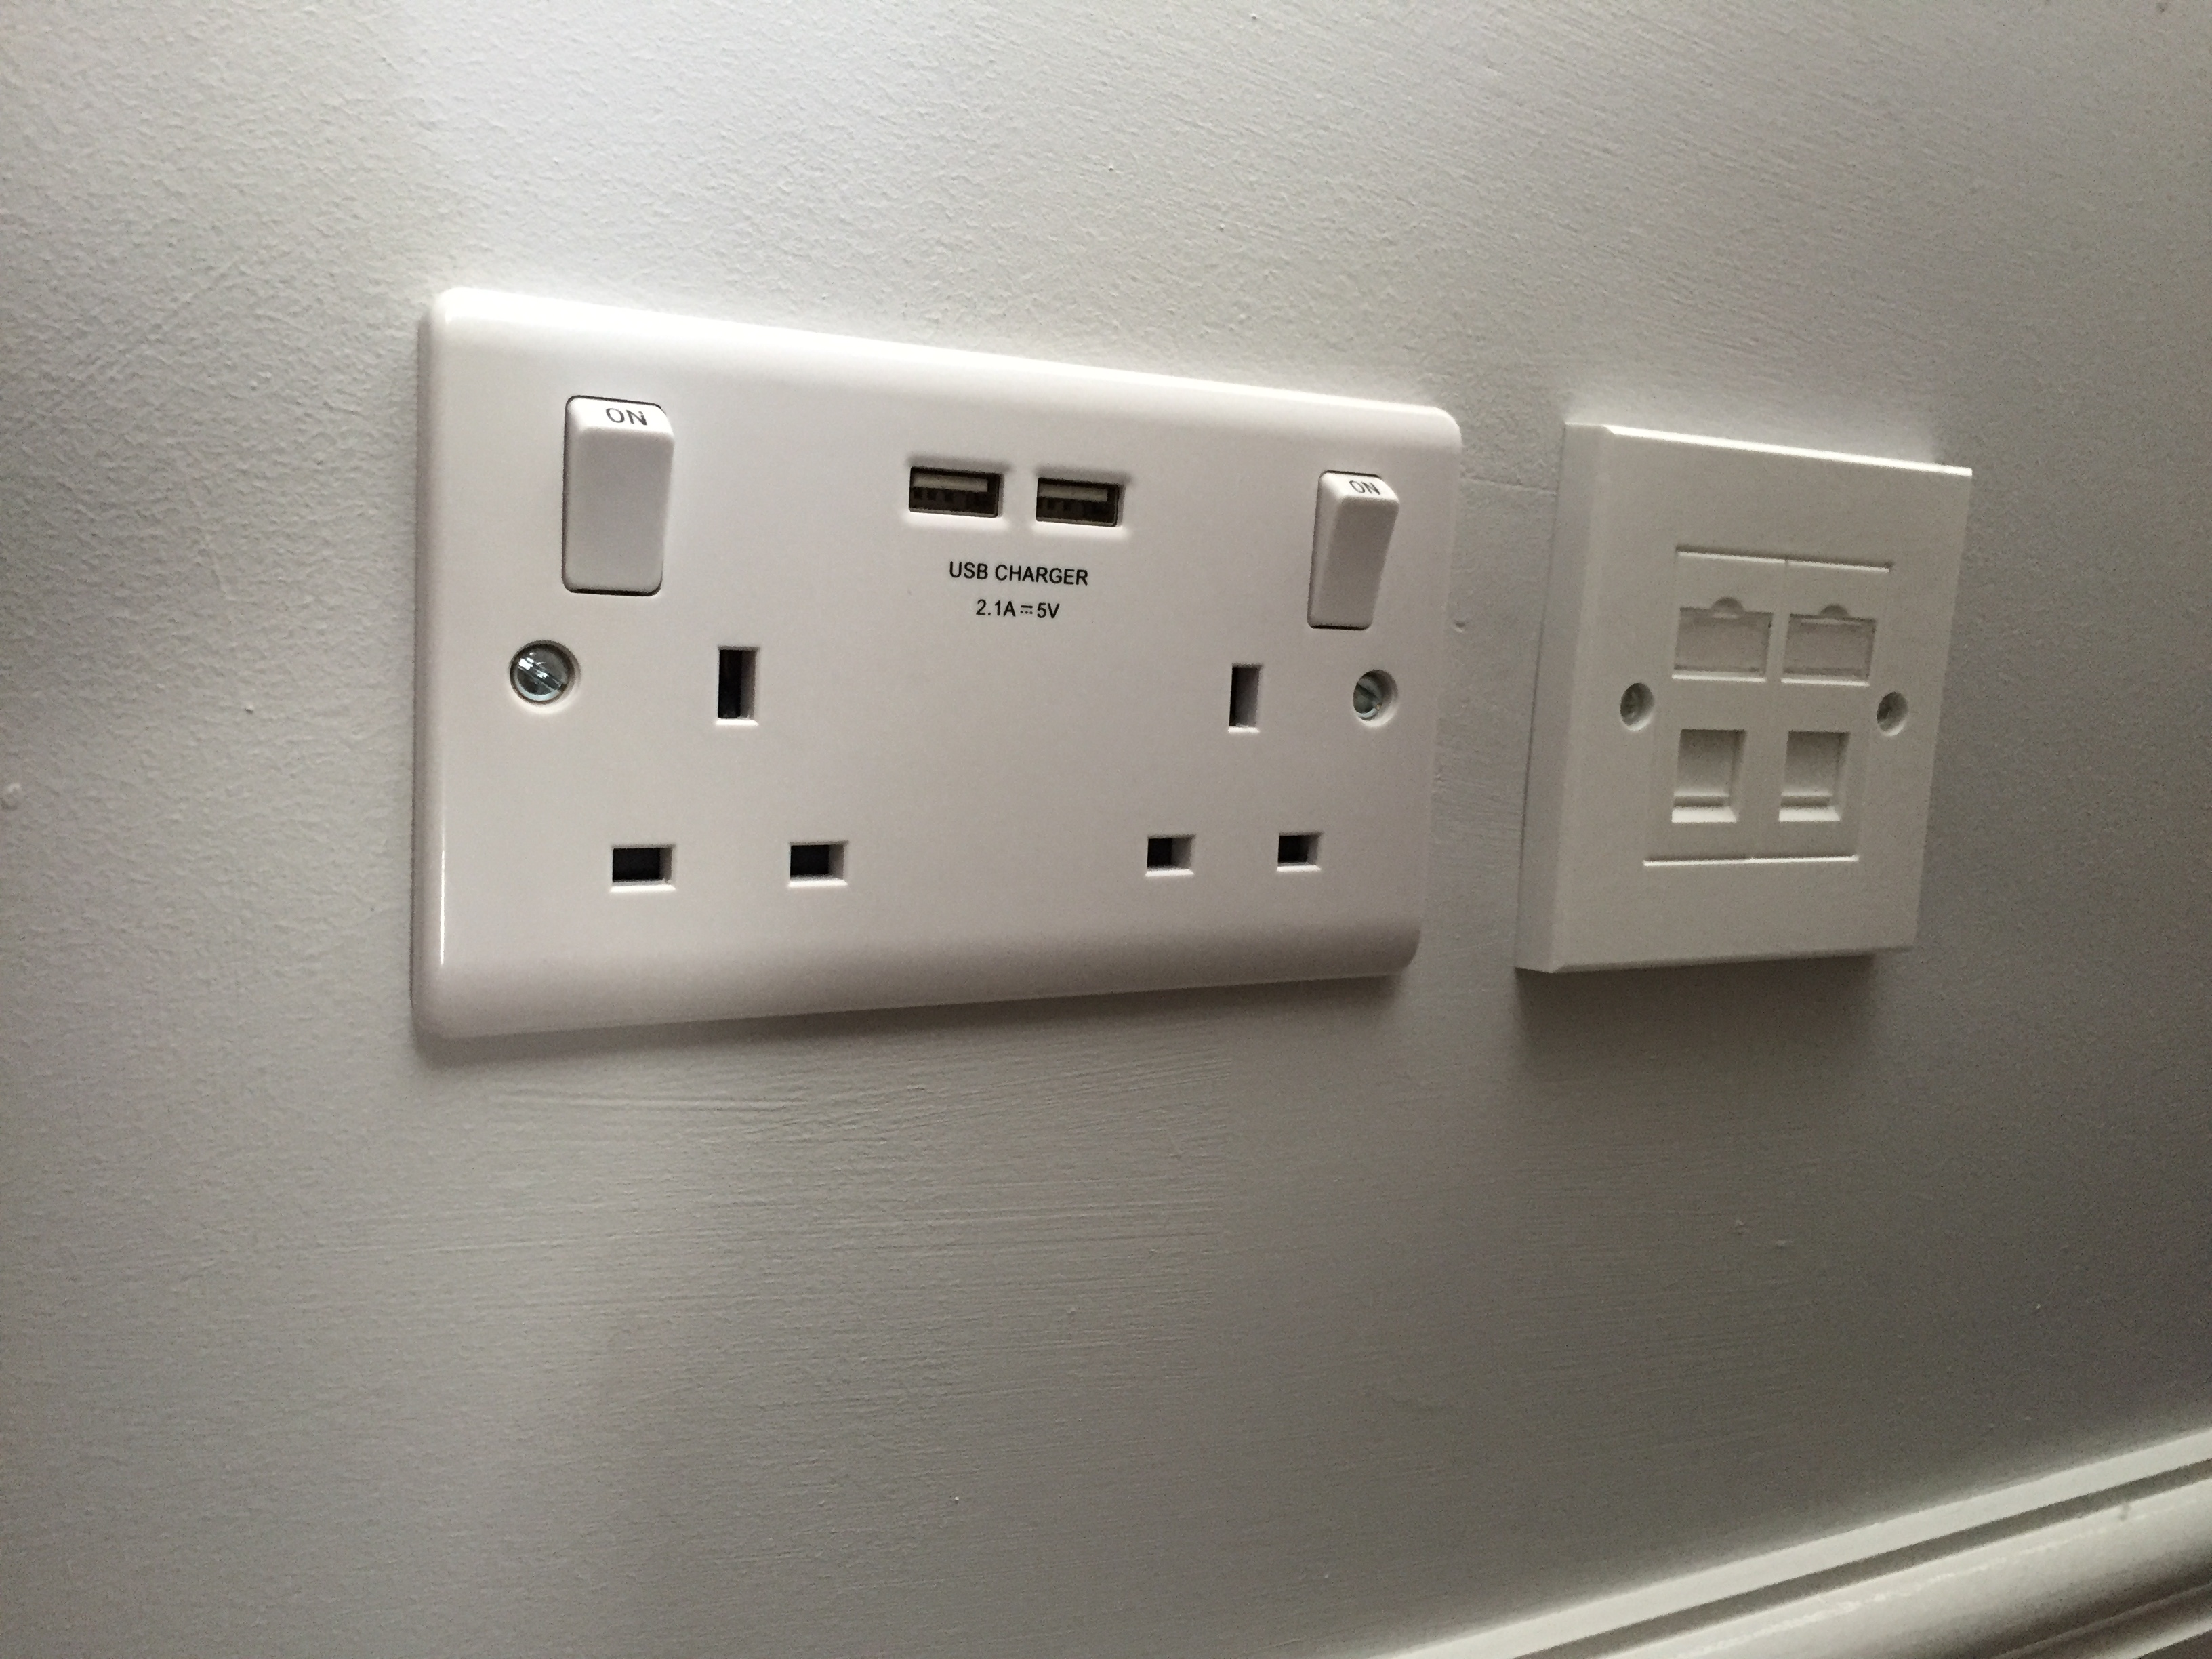 Replacement USB charging plug socket and cat5 data point